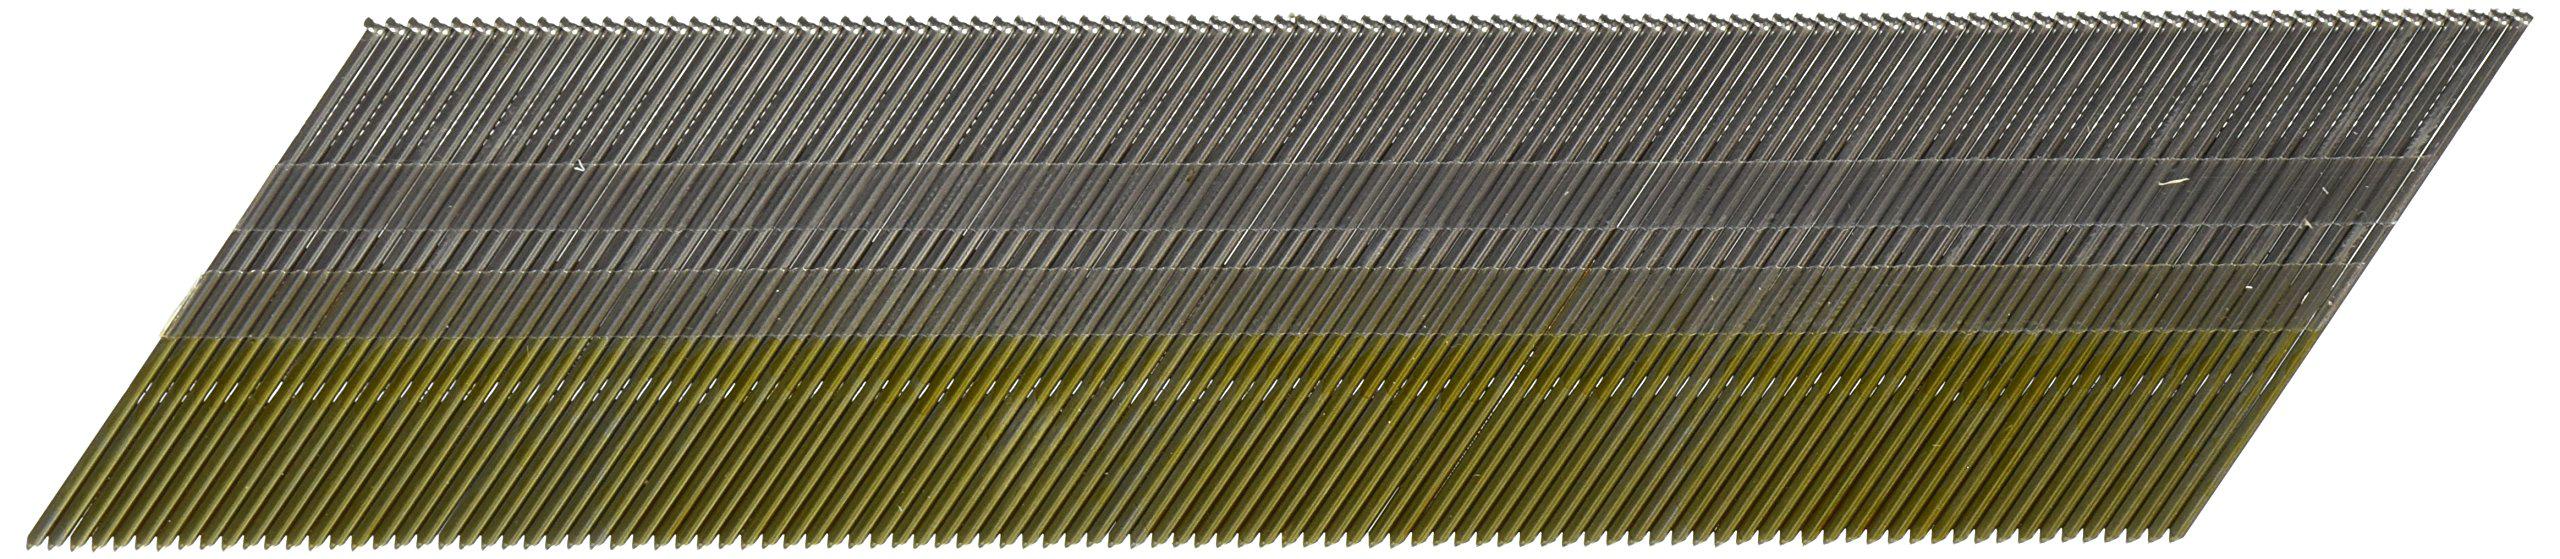 hitachi 14308 2-1/2 in. x 15-gauge angled finish nails (3,000-pack)